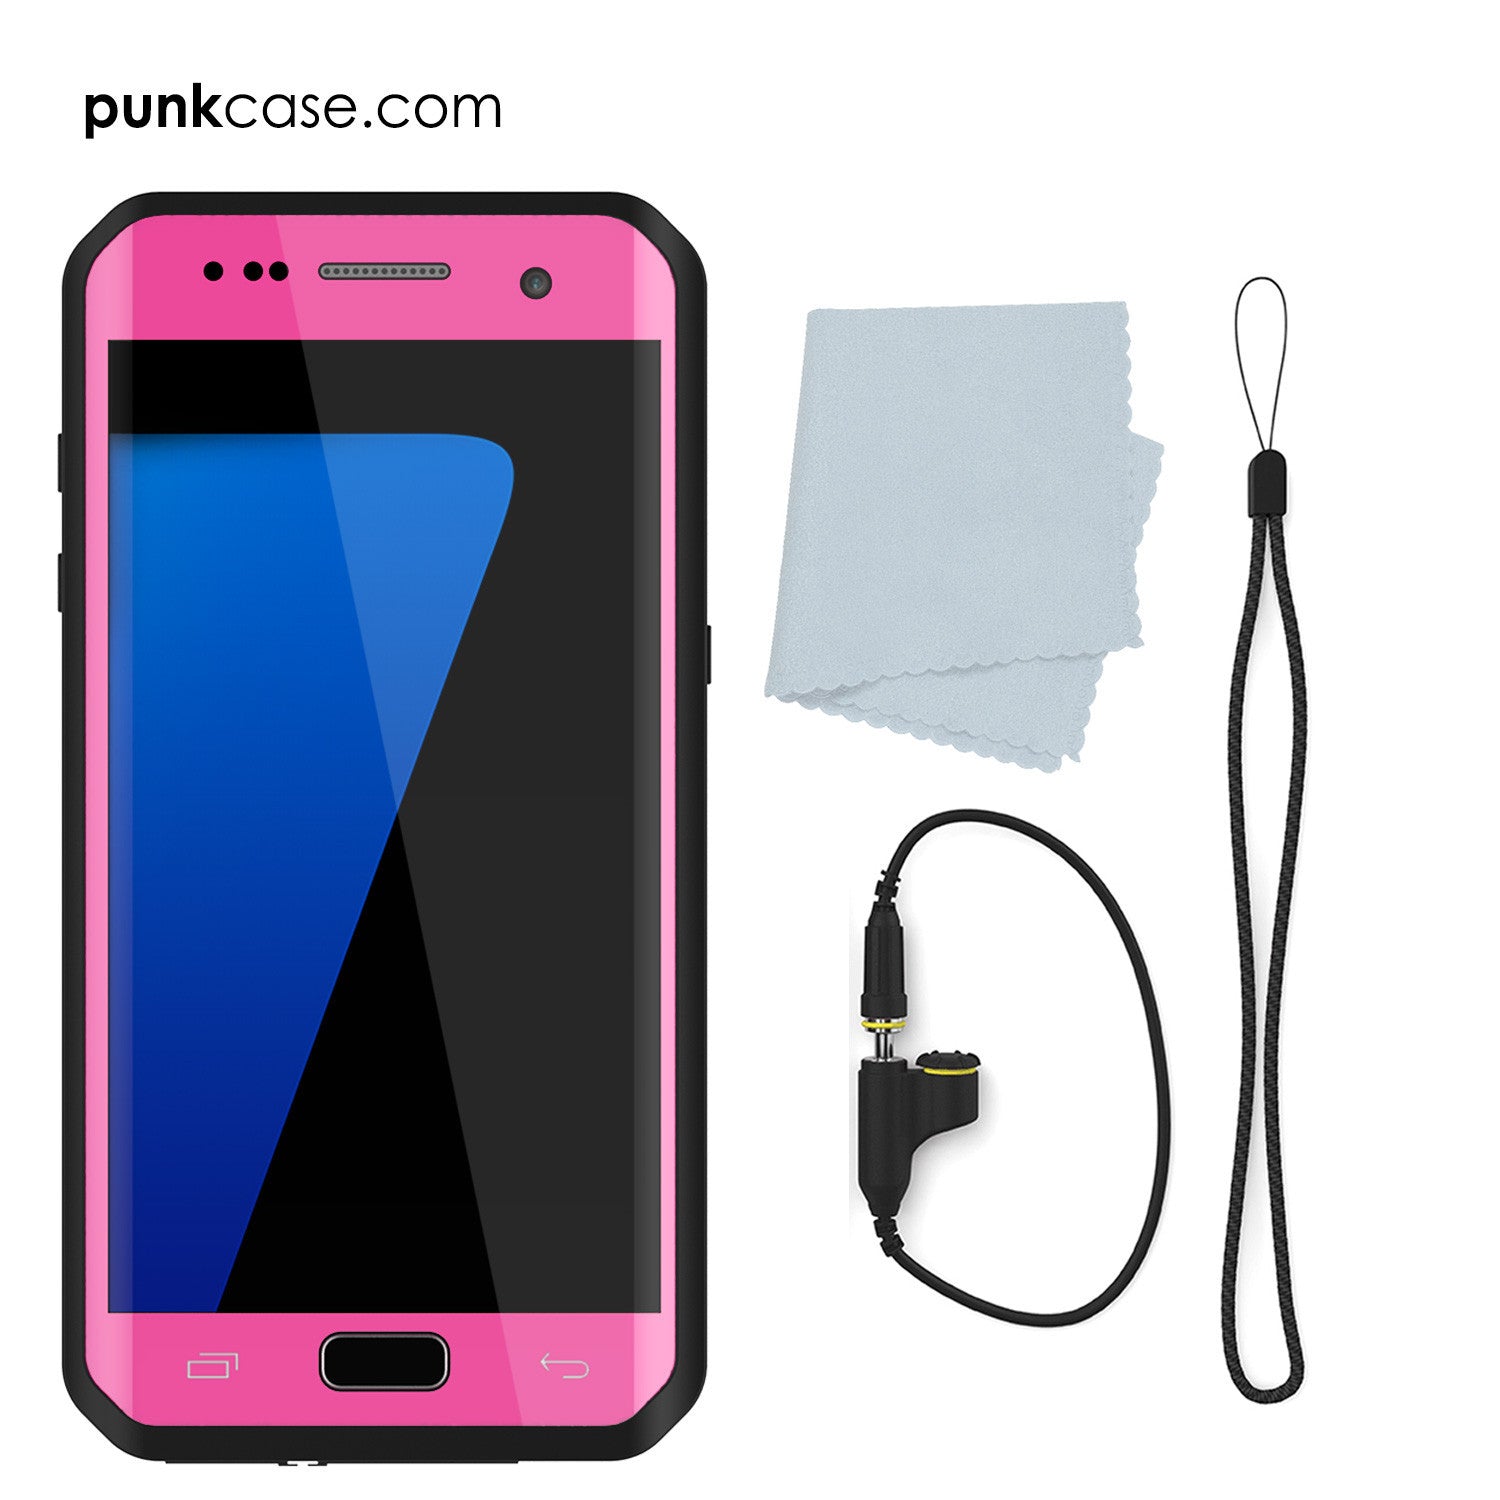 PUNKCASE - Studstar Series Snowproof Case for Galaxy S7 Edge | Pink